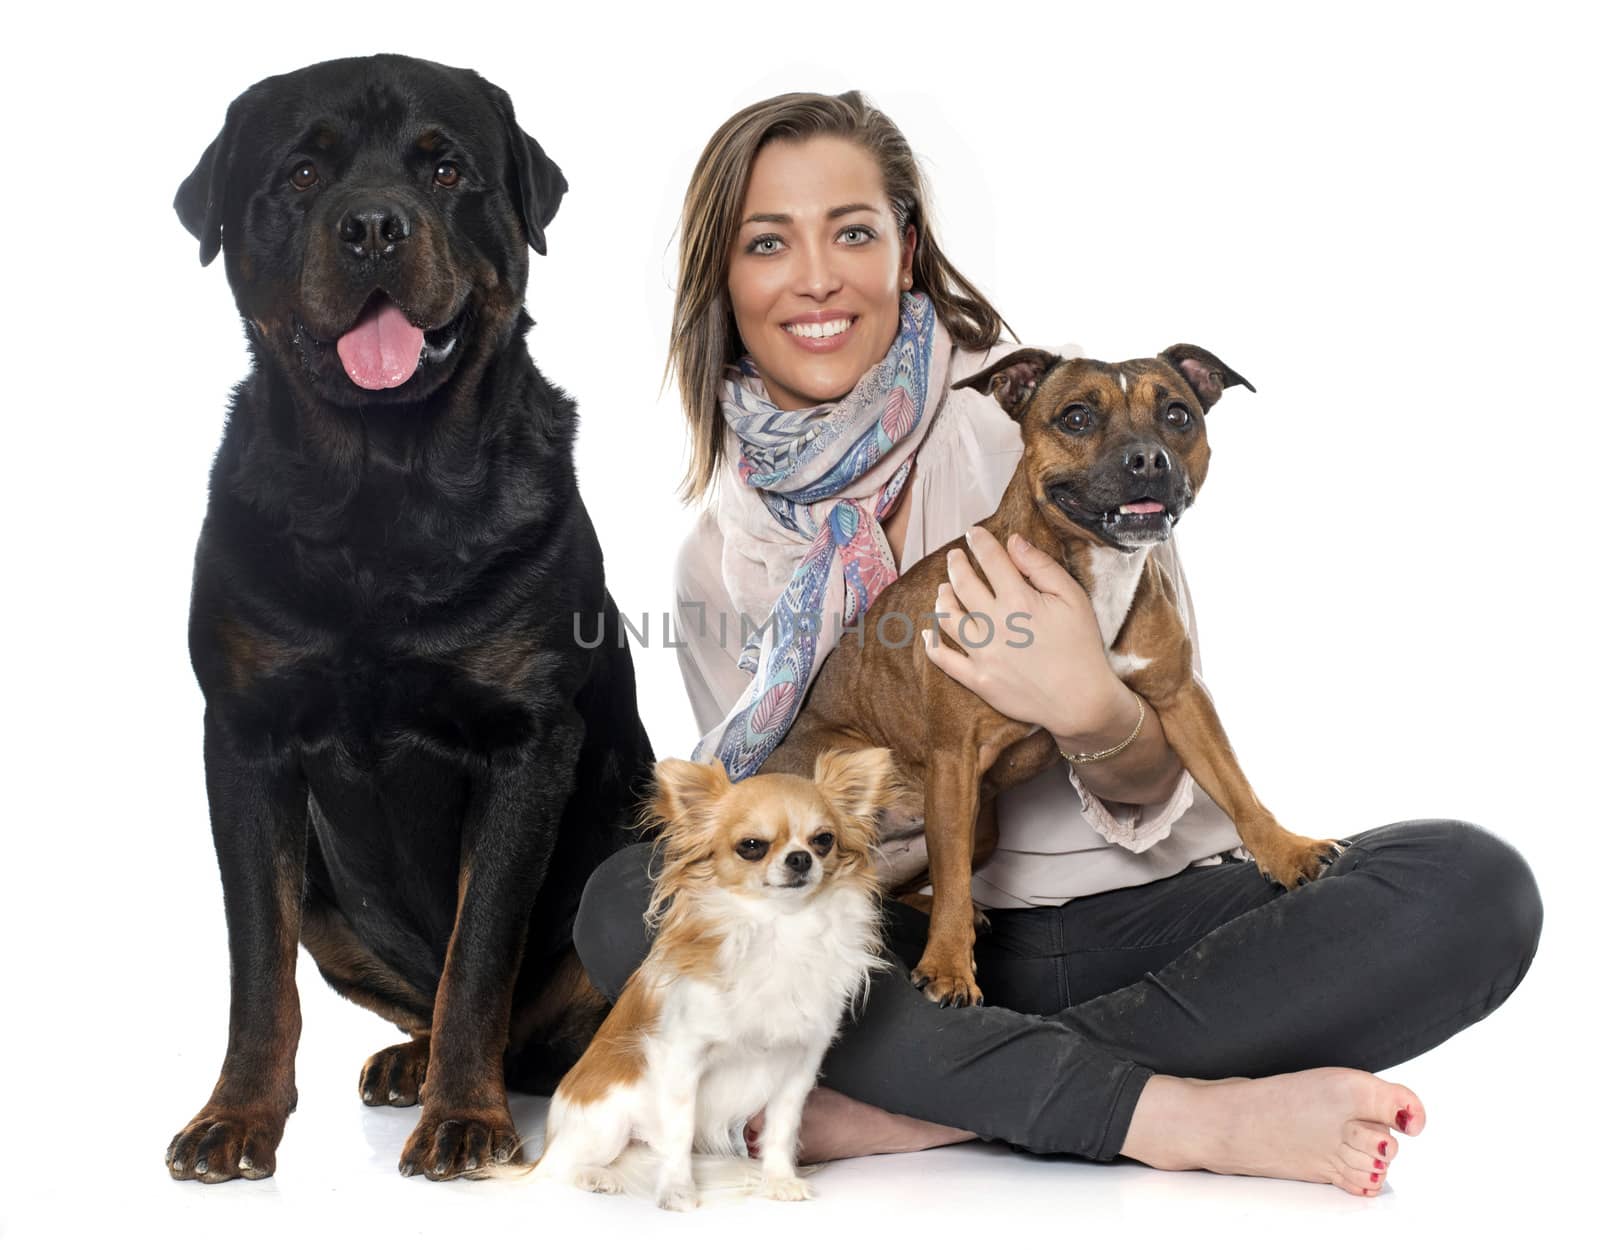 woman and dogs by cynoclub